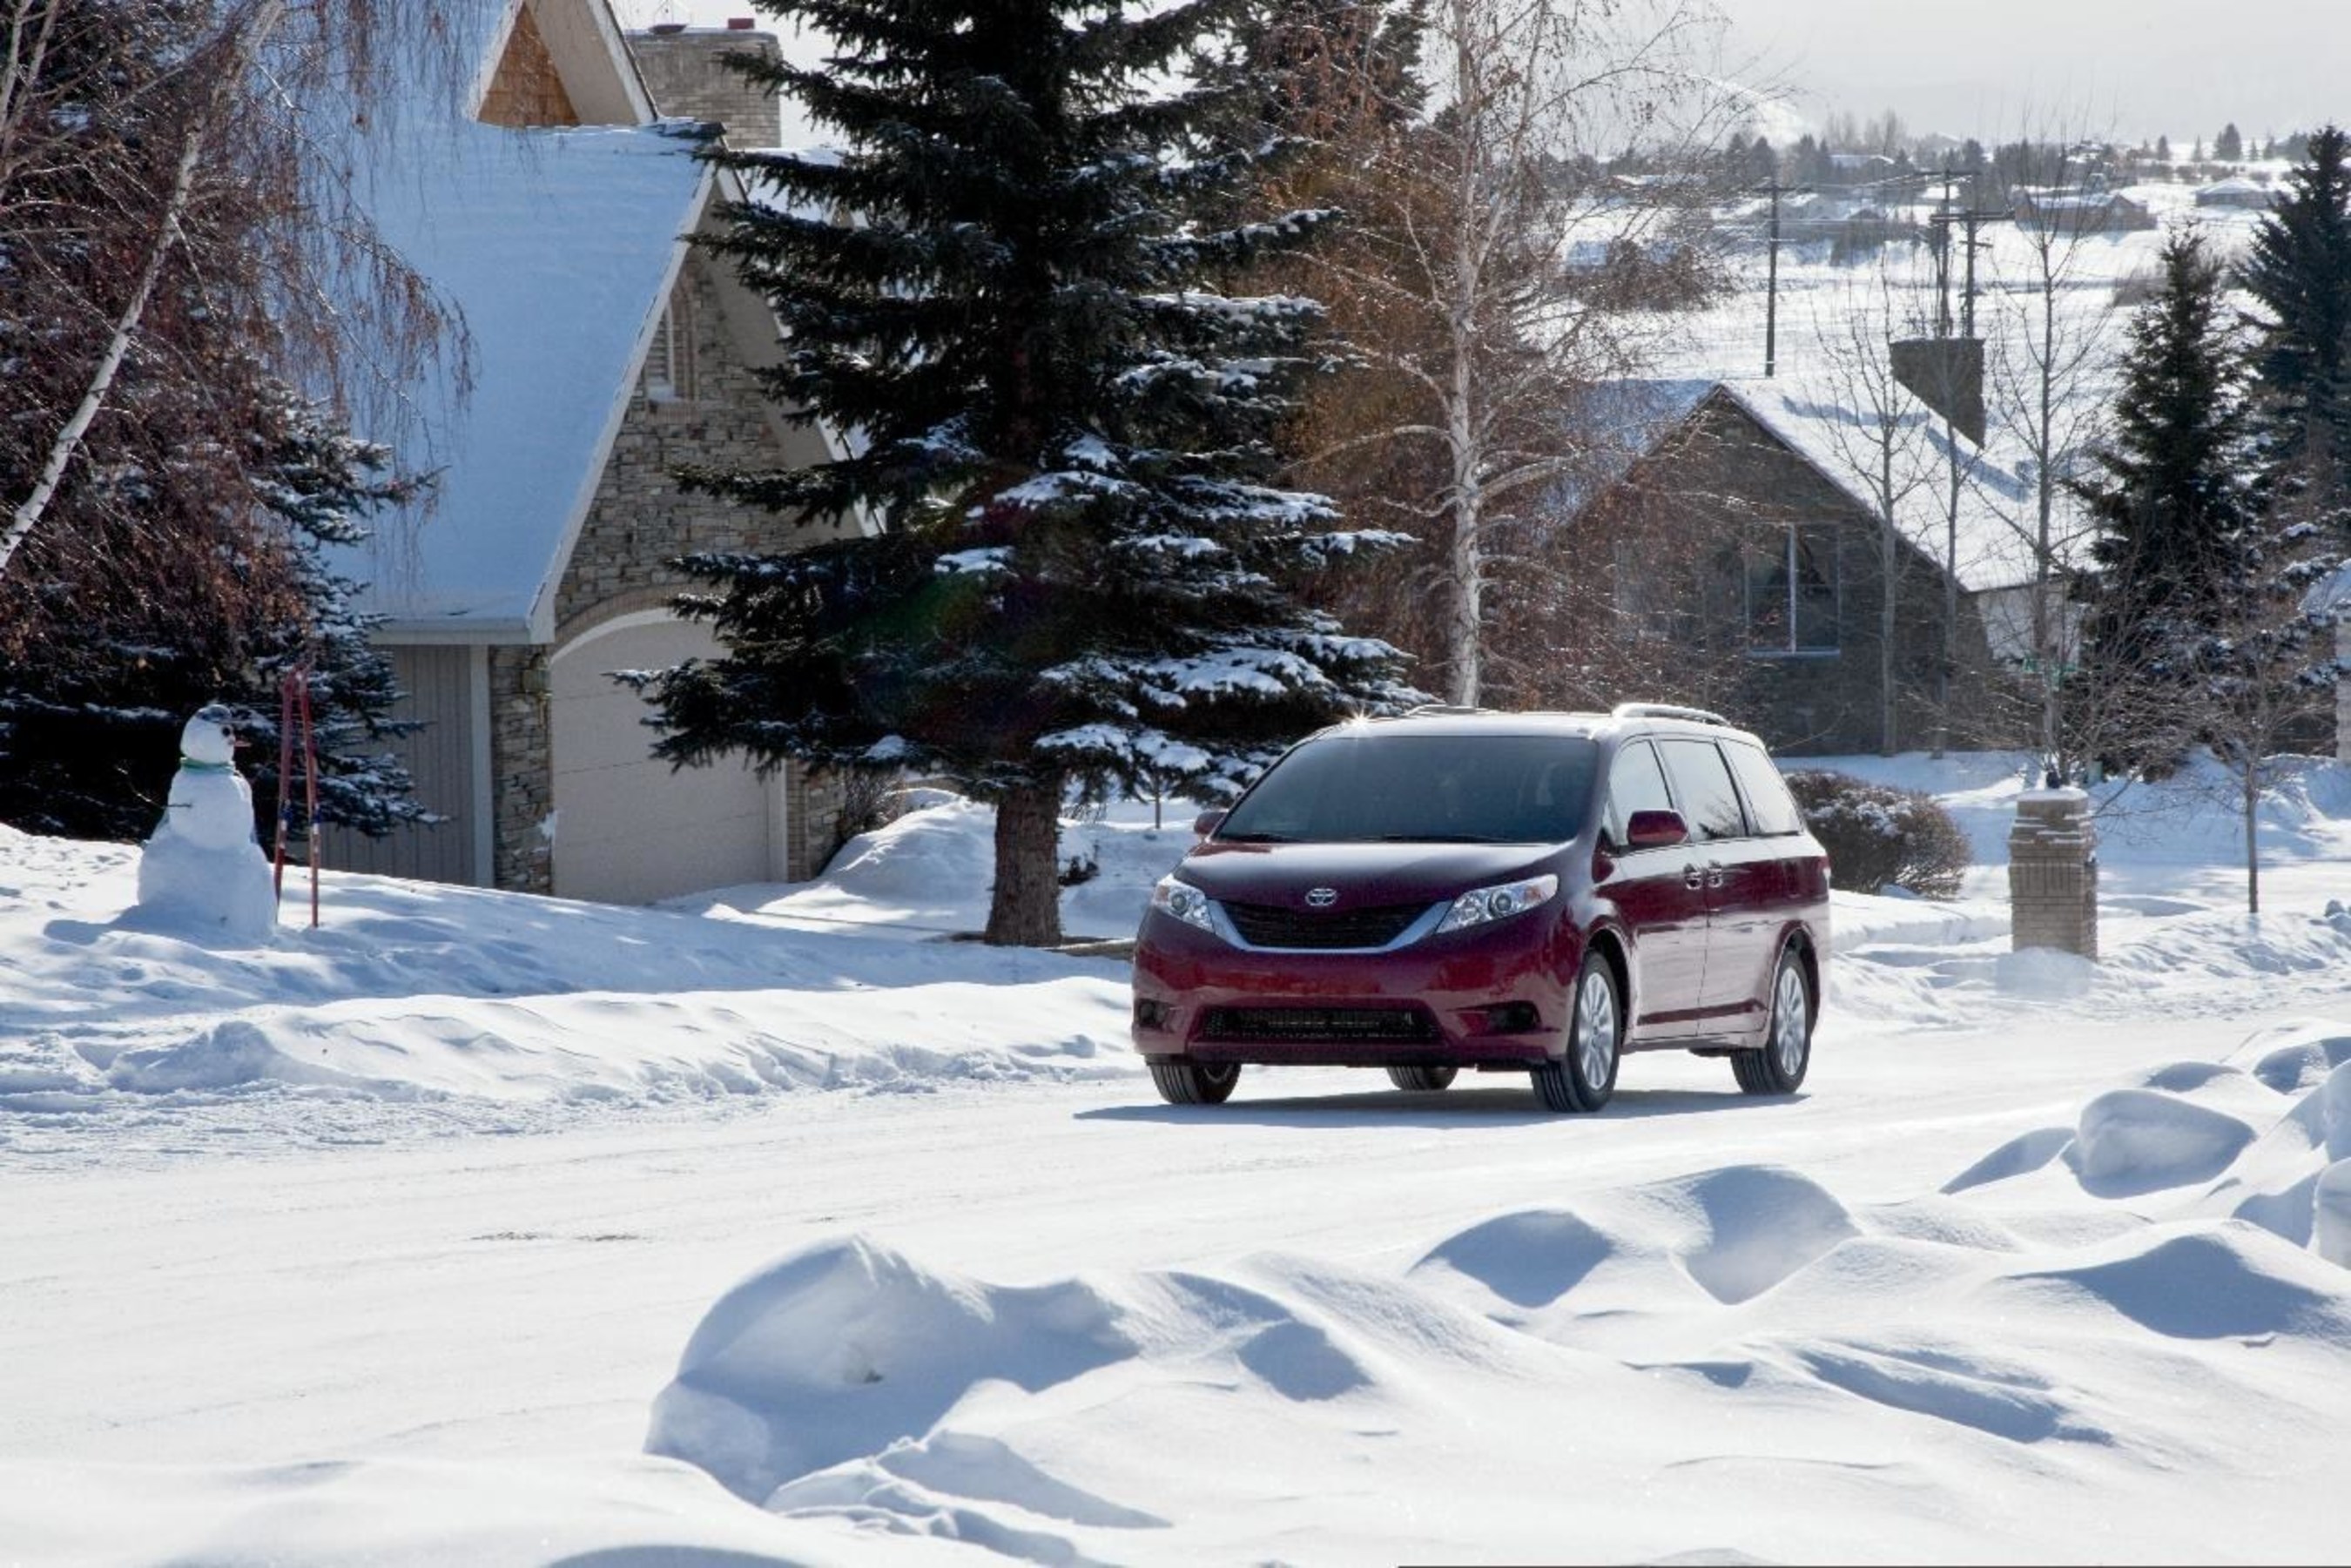 Hertz and Longtime Partner, AAA, Provide Helpful Guidelines for Safe Driving When Traveling This Winter